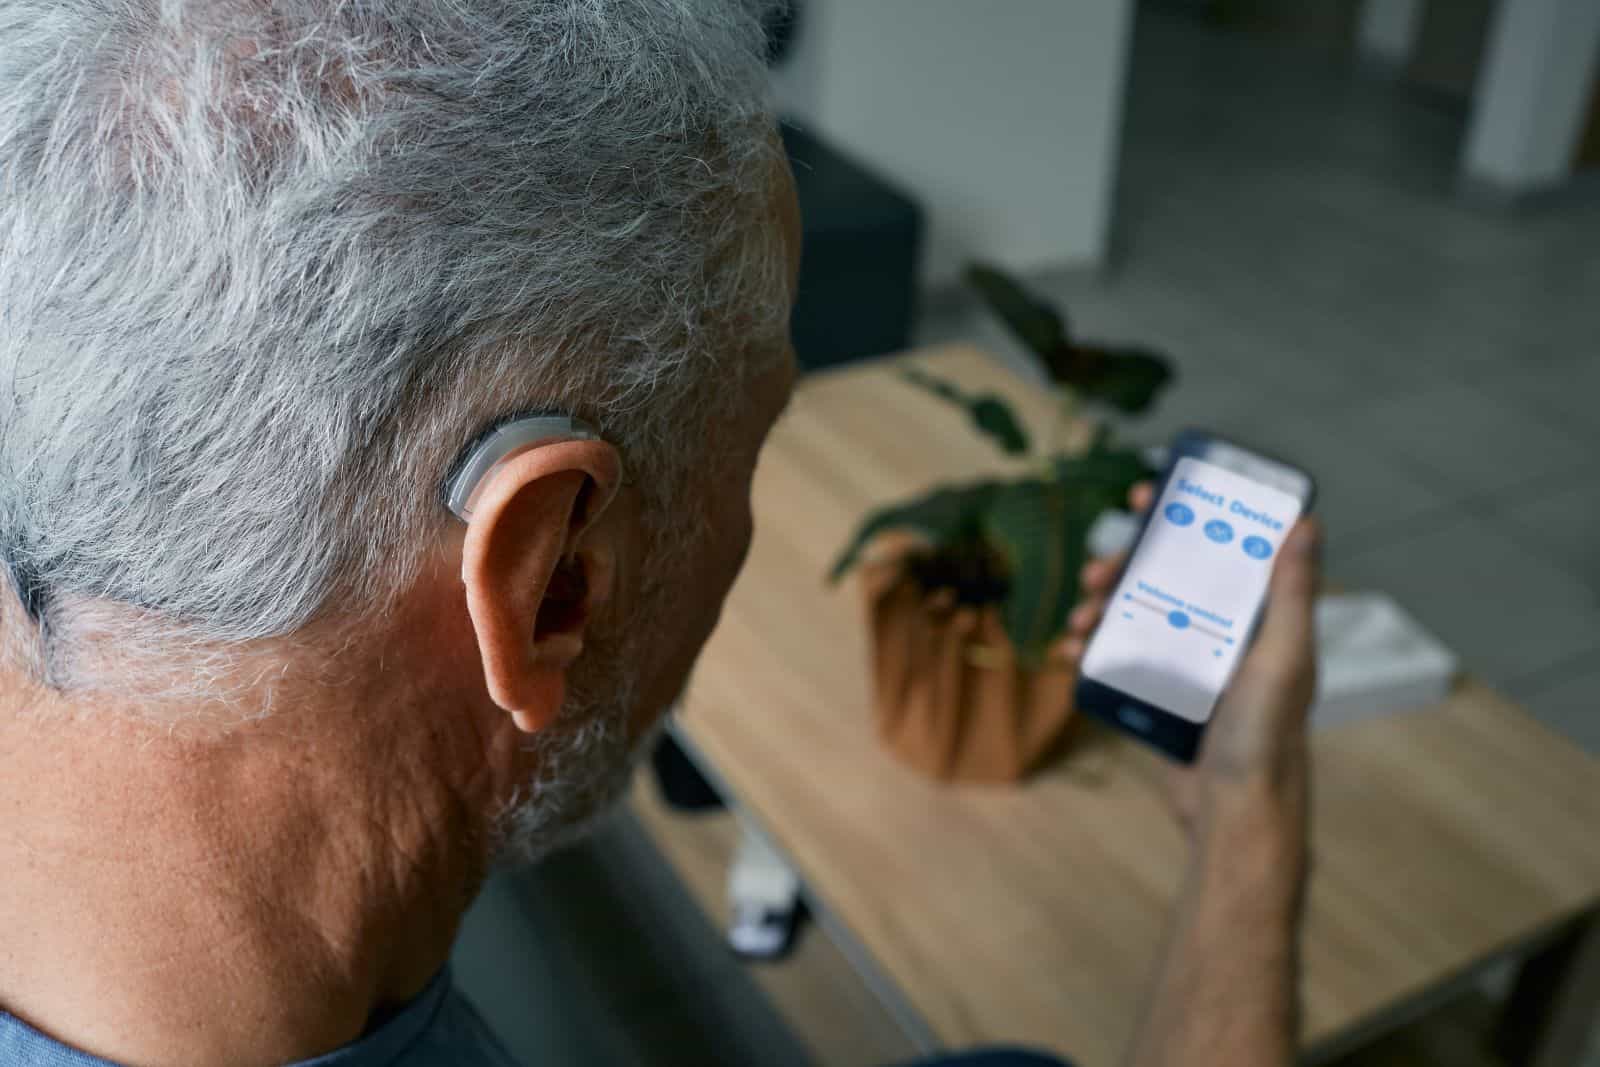 man with hearing aid using the hearing aid app